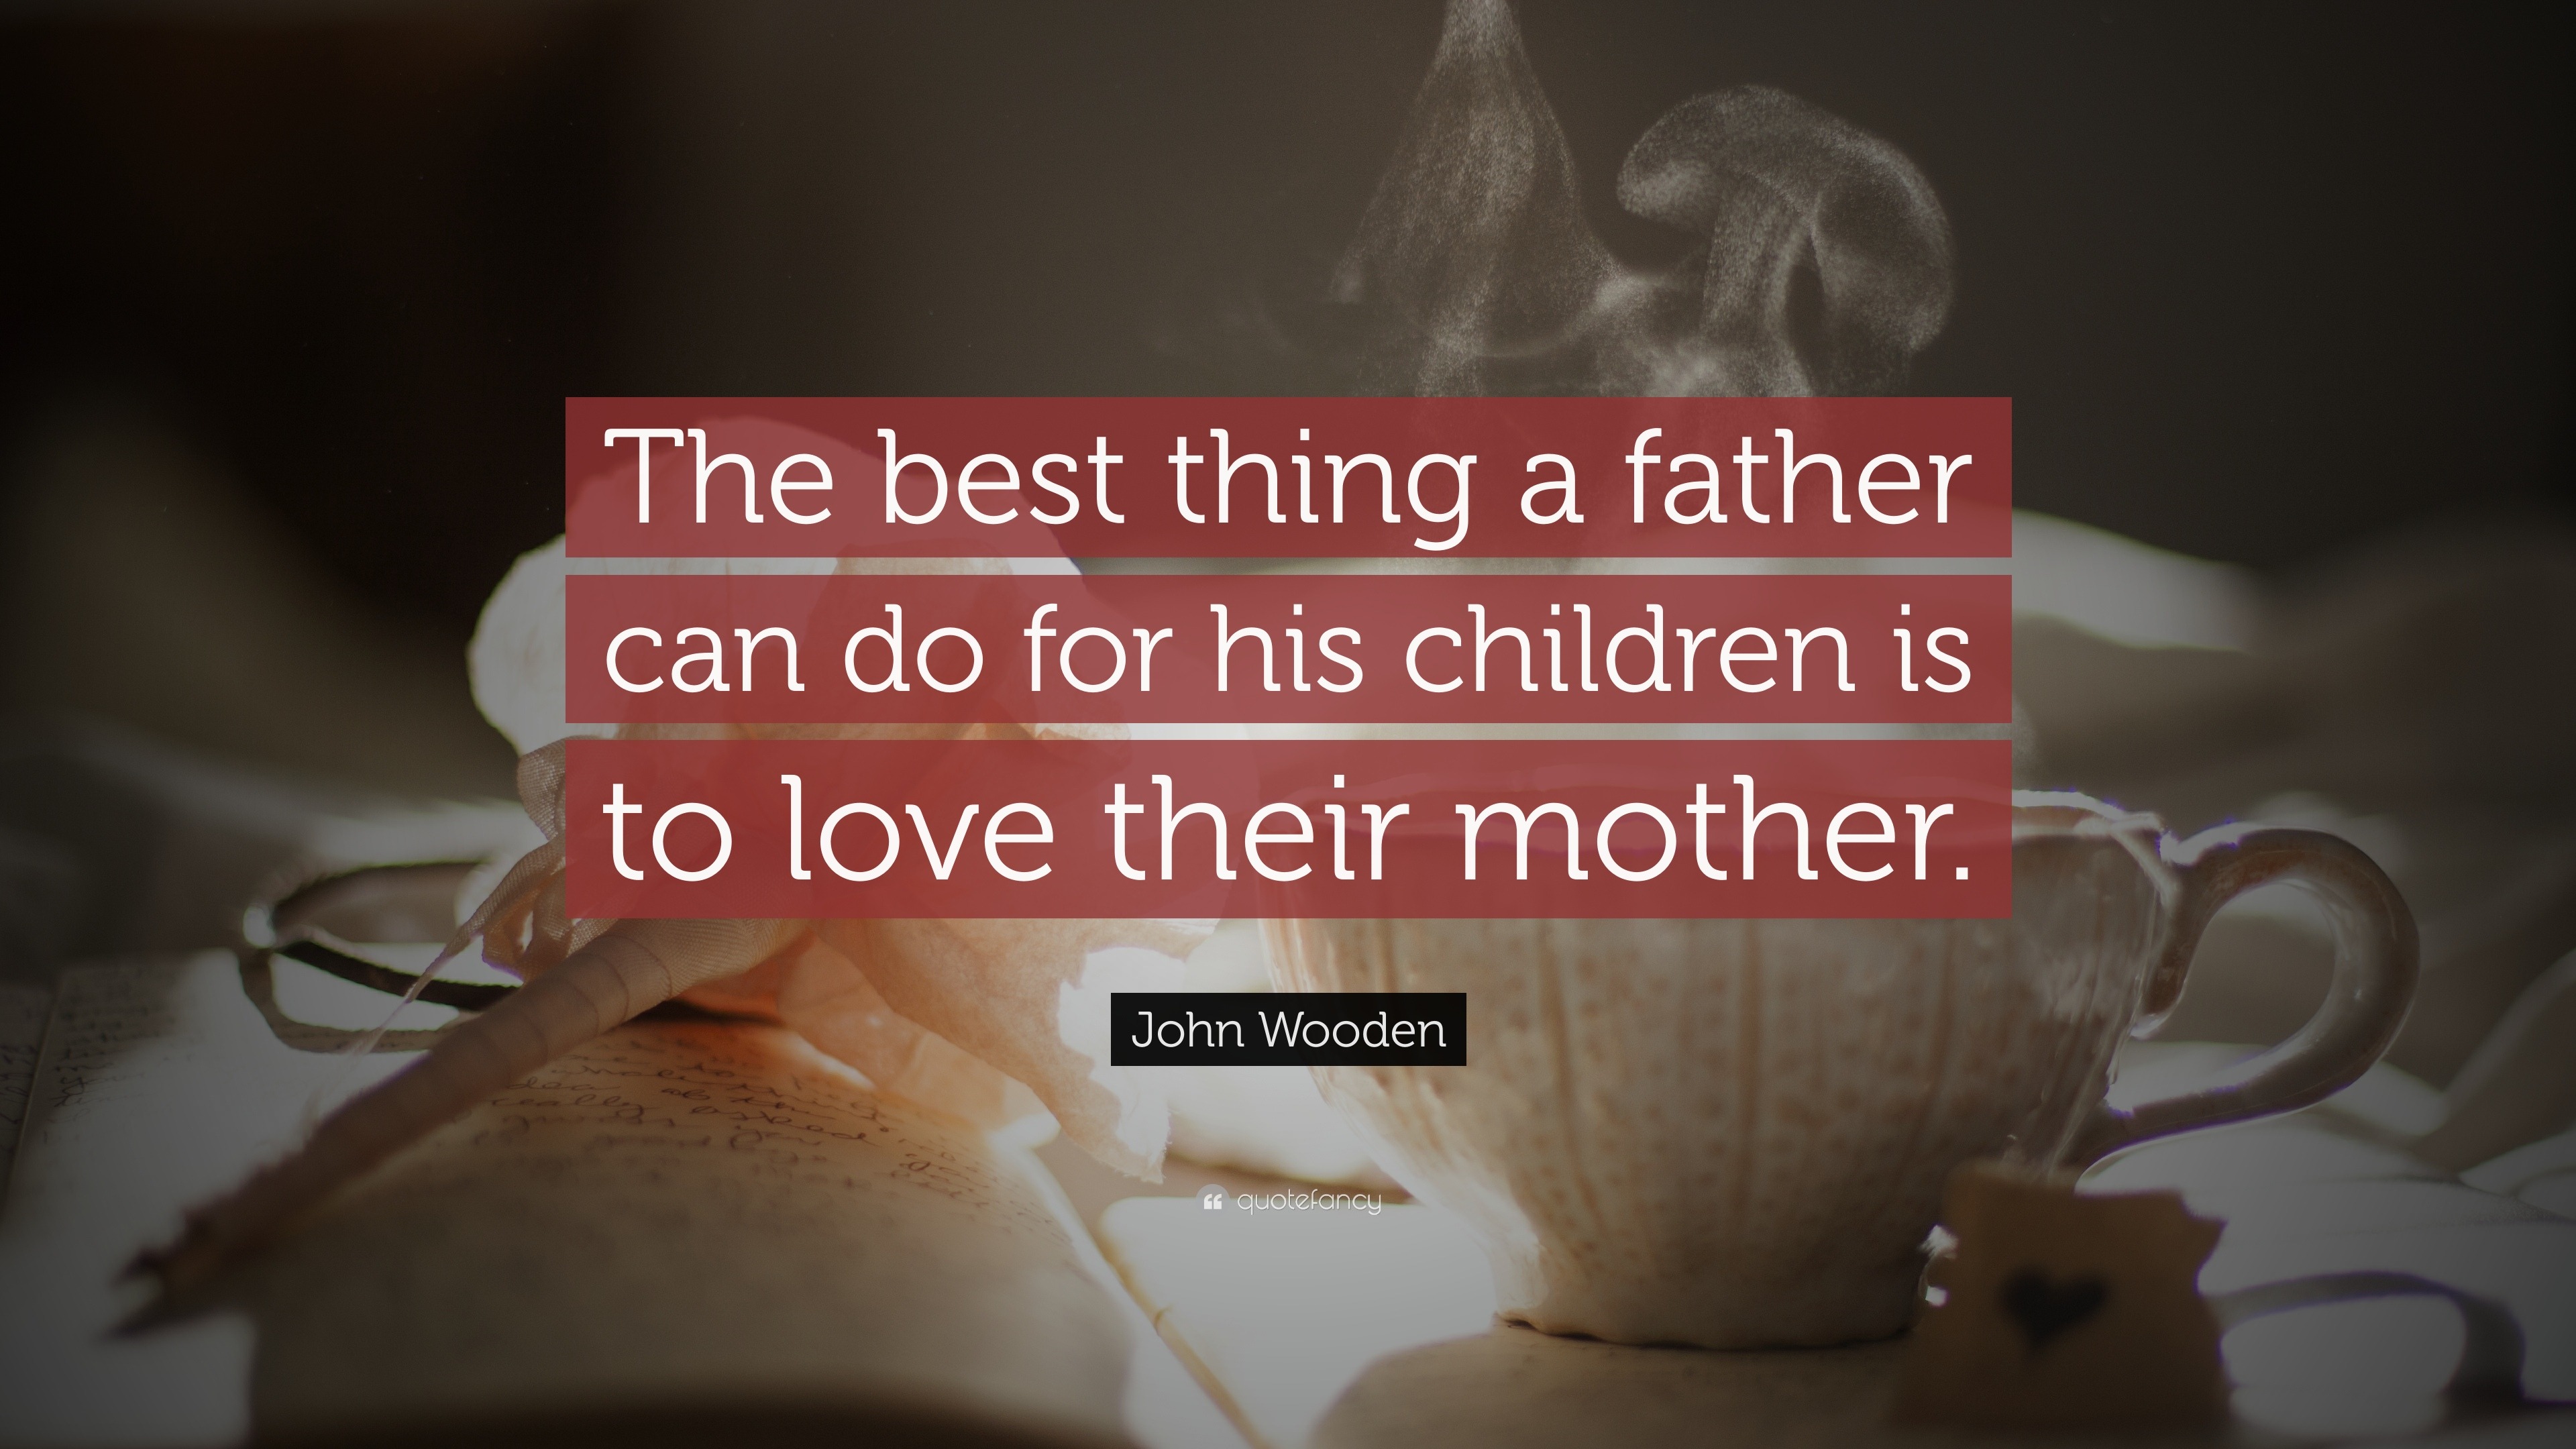 John Wooden Quote “The best thing a father can do for his children is